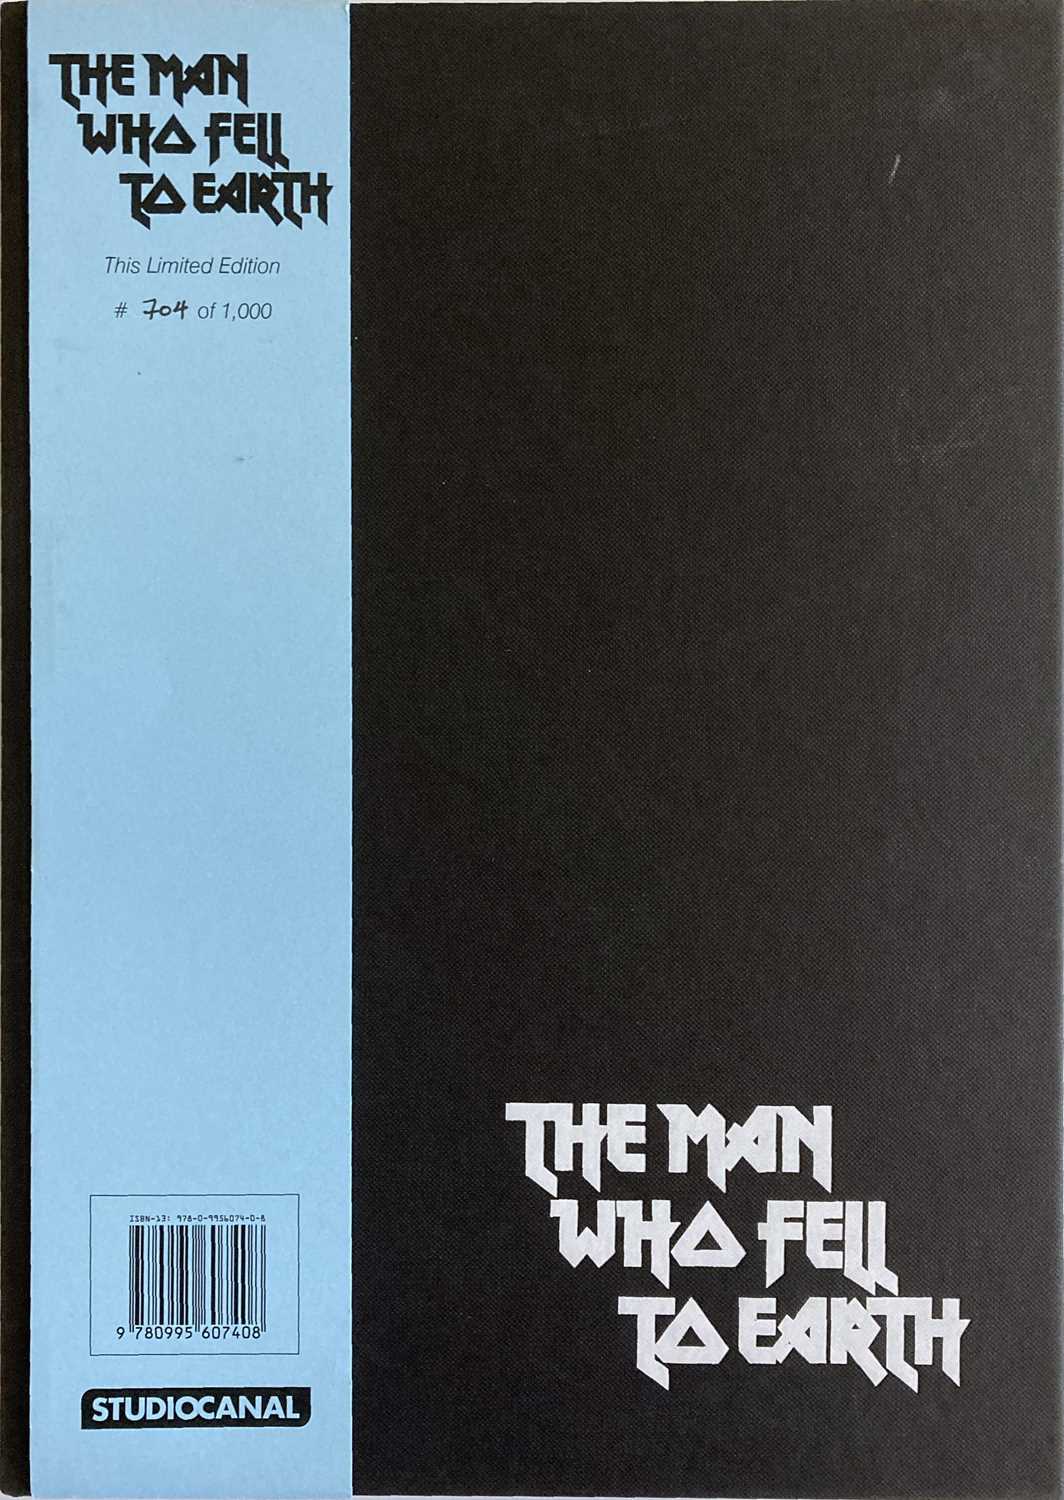 Lot 421 - DAVID BOWIE - THE MAN WHO FELL TO EARTH STUDIO CANAL LTD EDITION BOOK.